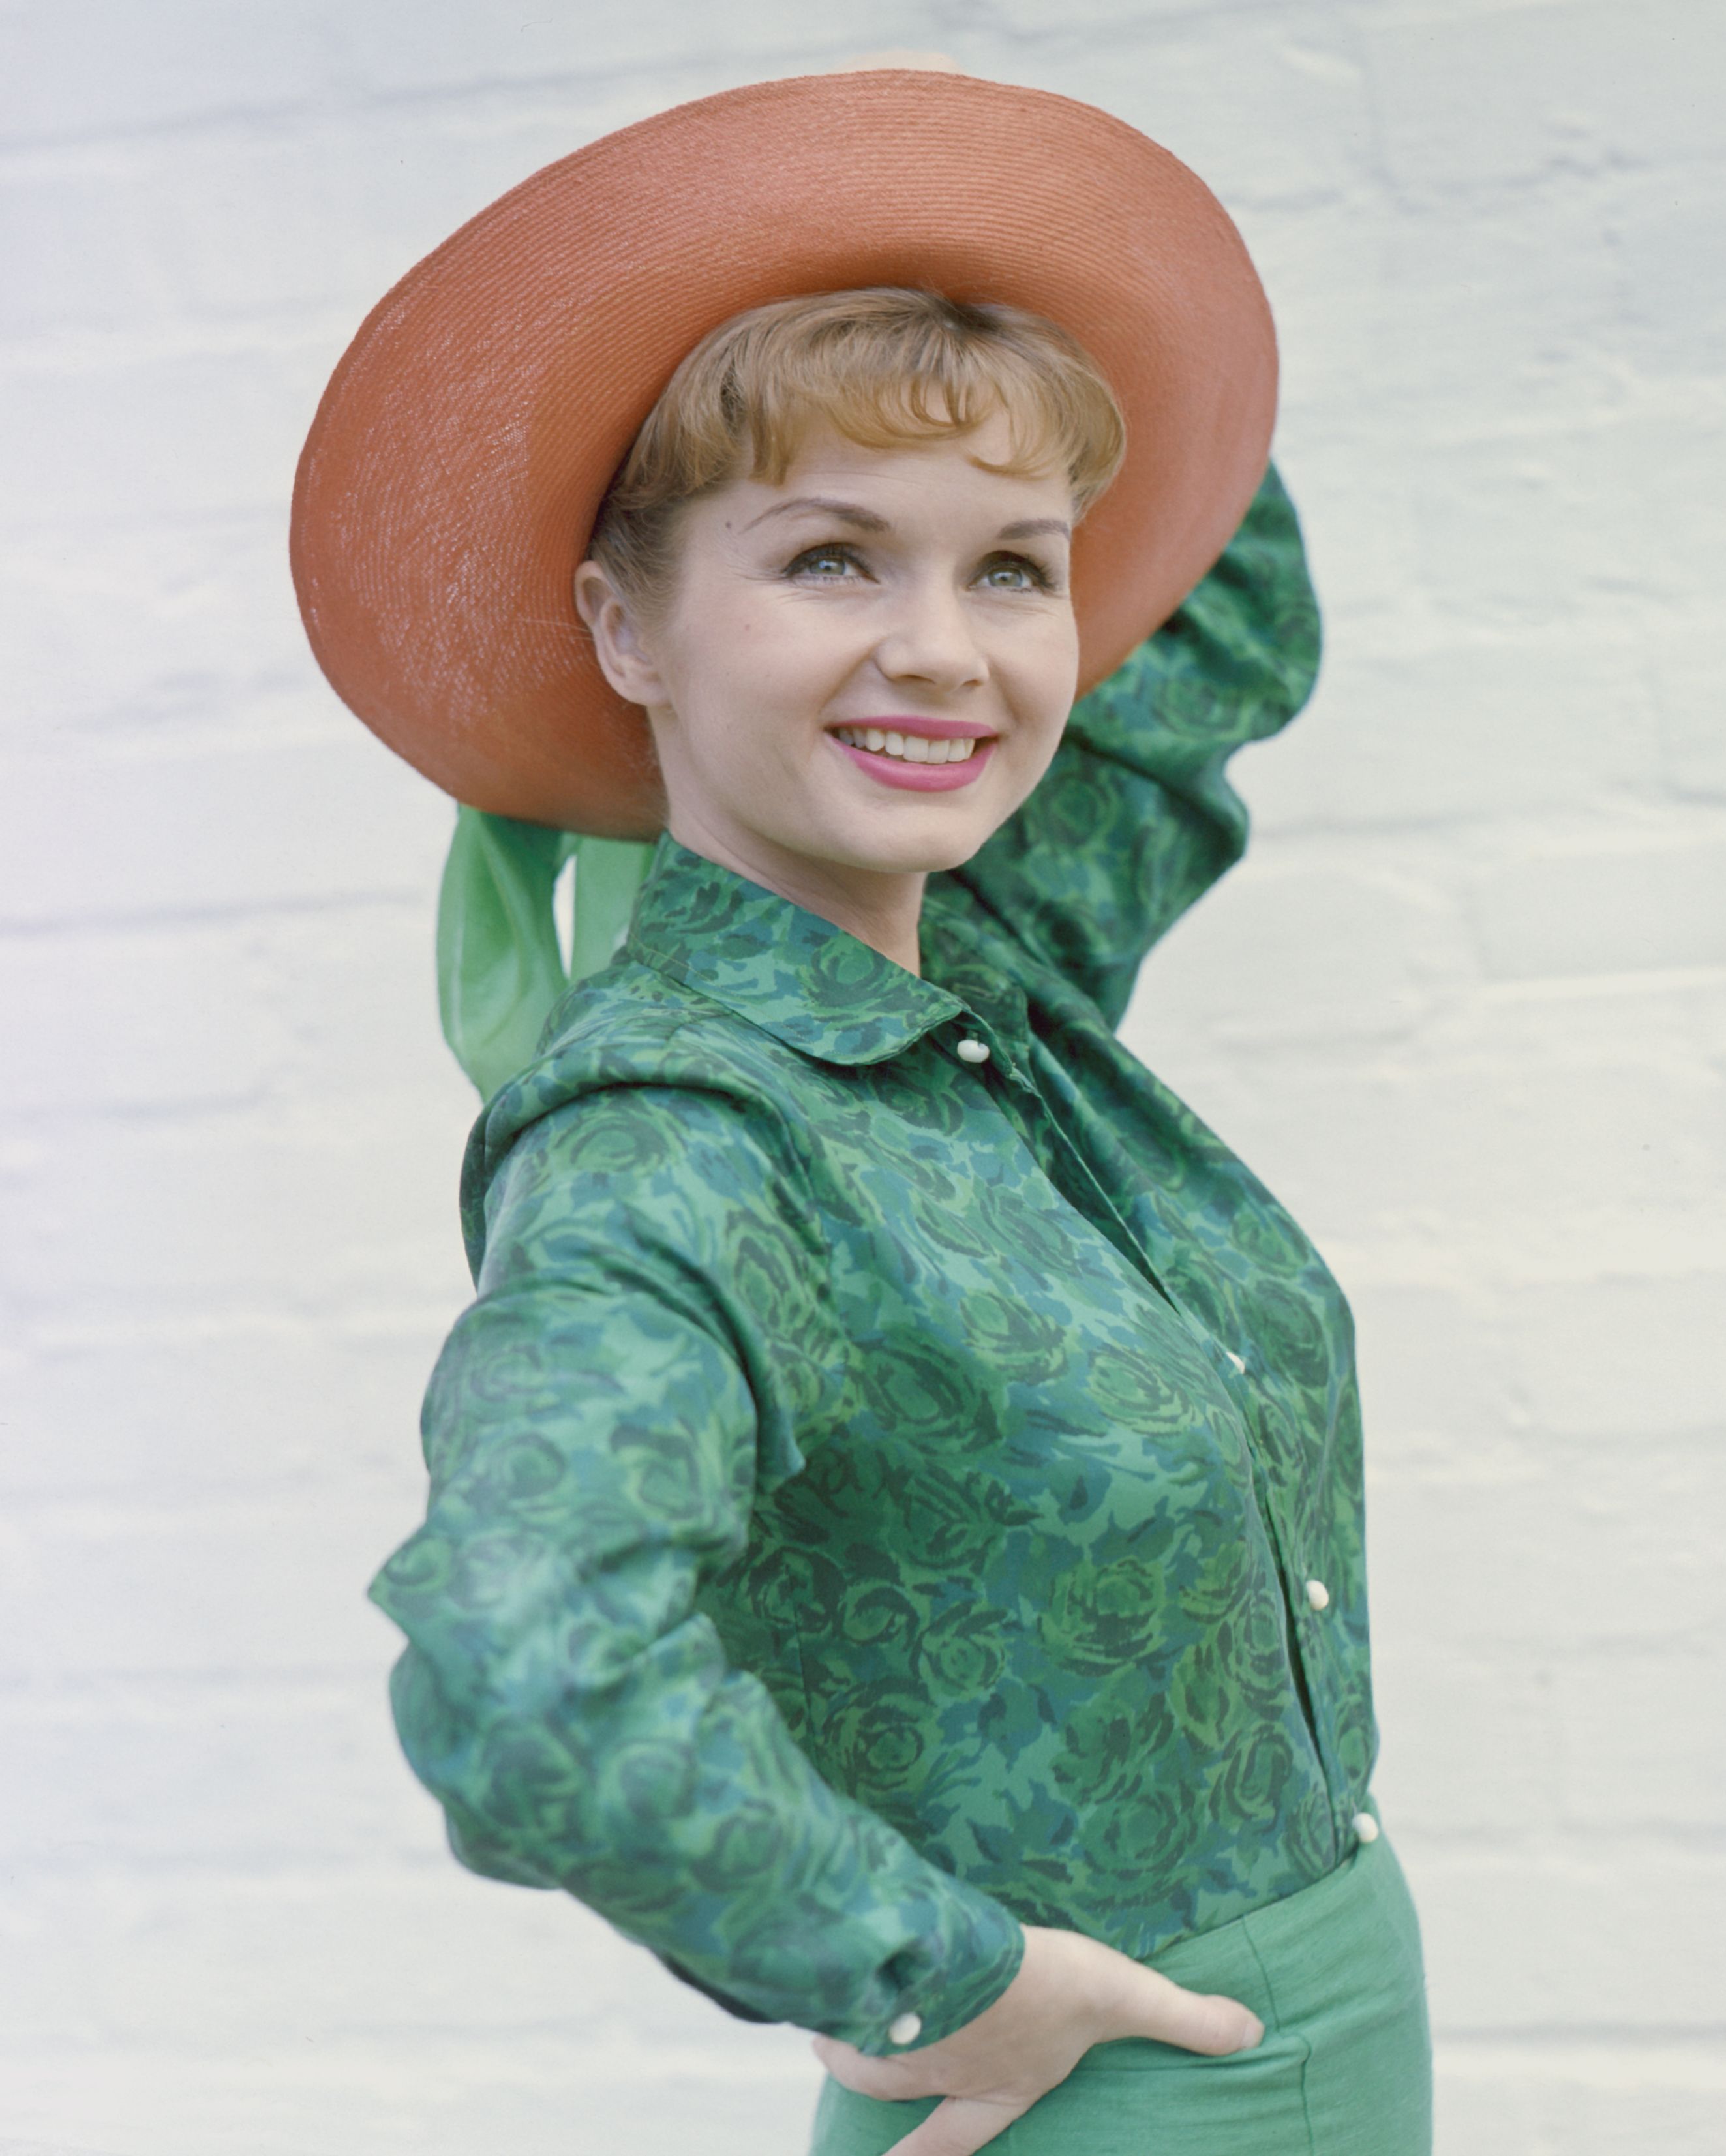 Actress Debbie Reynolds pictured smiling while posing in a green shirt and wide-brimmed salmon pink hat on January 01, 1960 | Photo: Getty Images